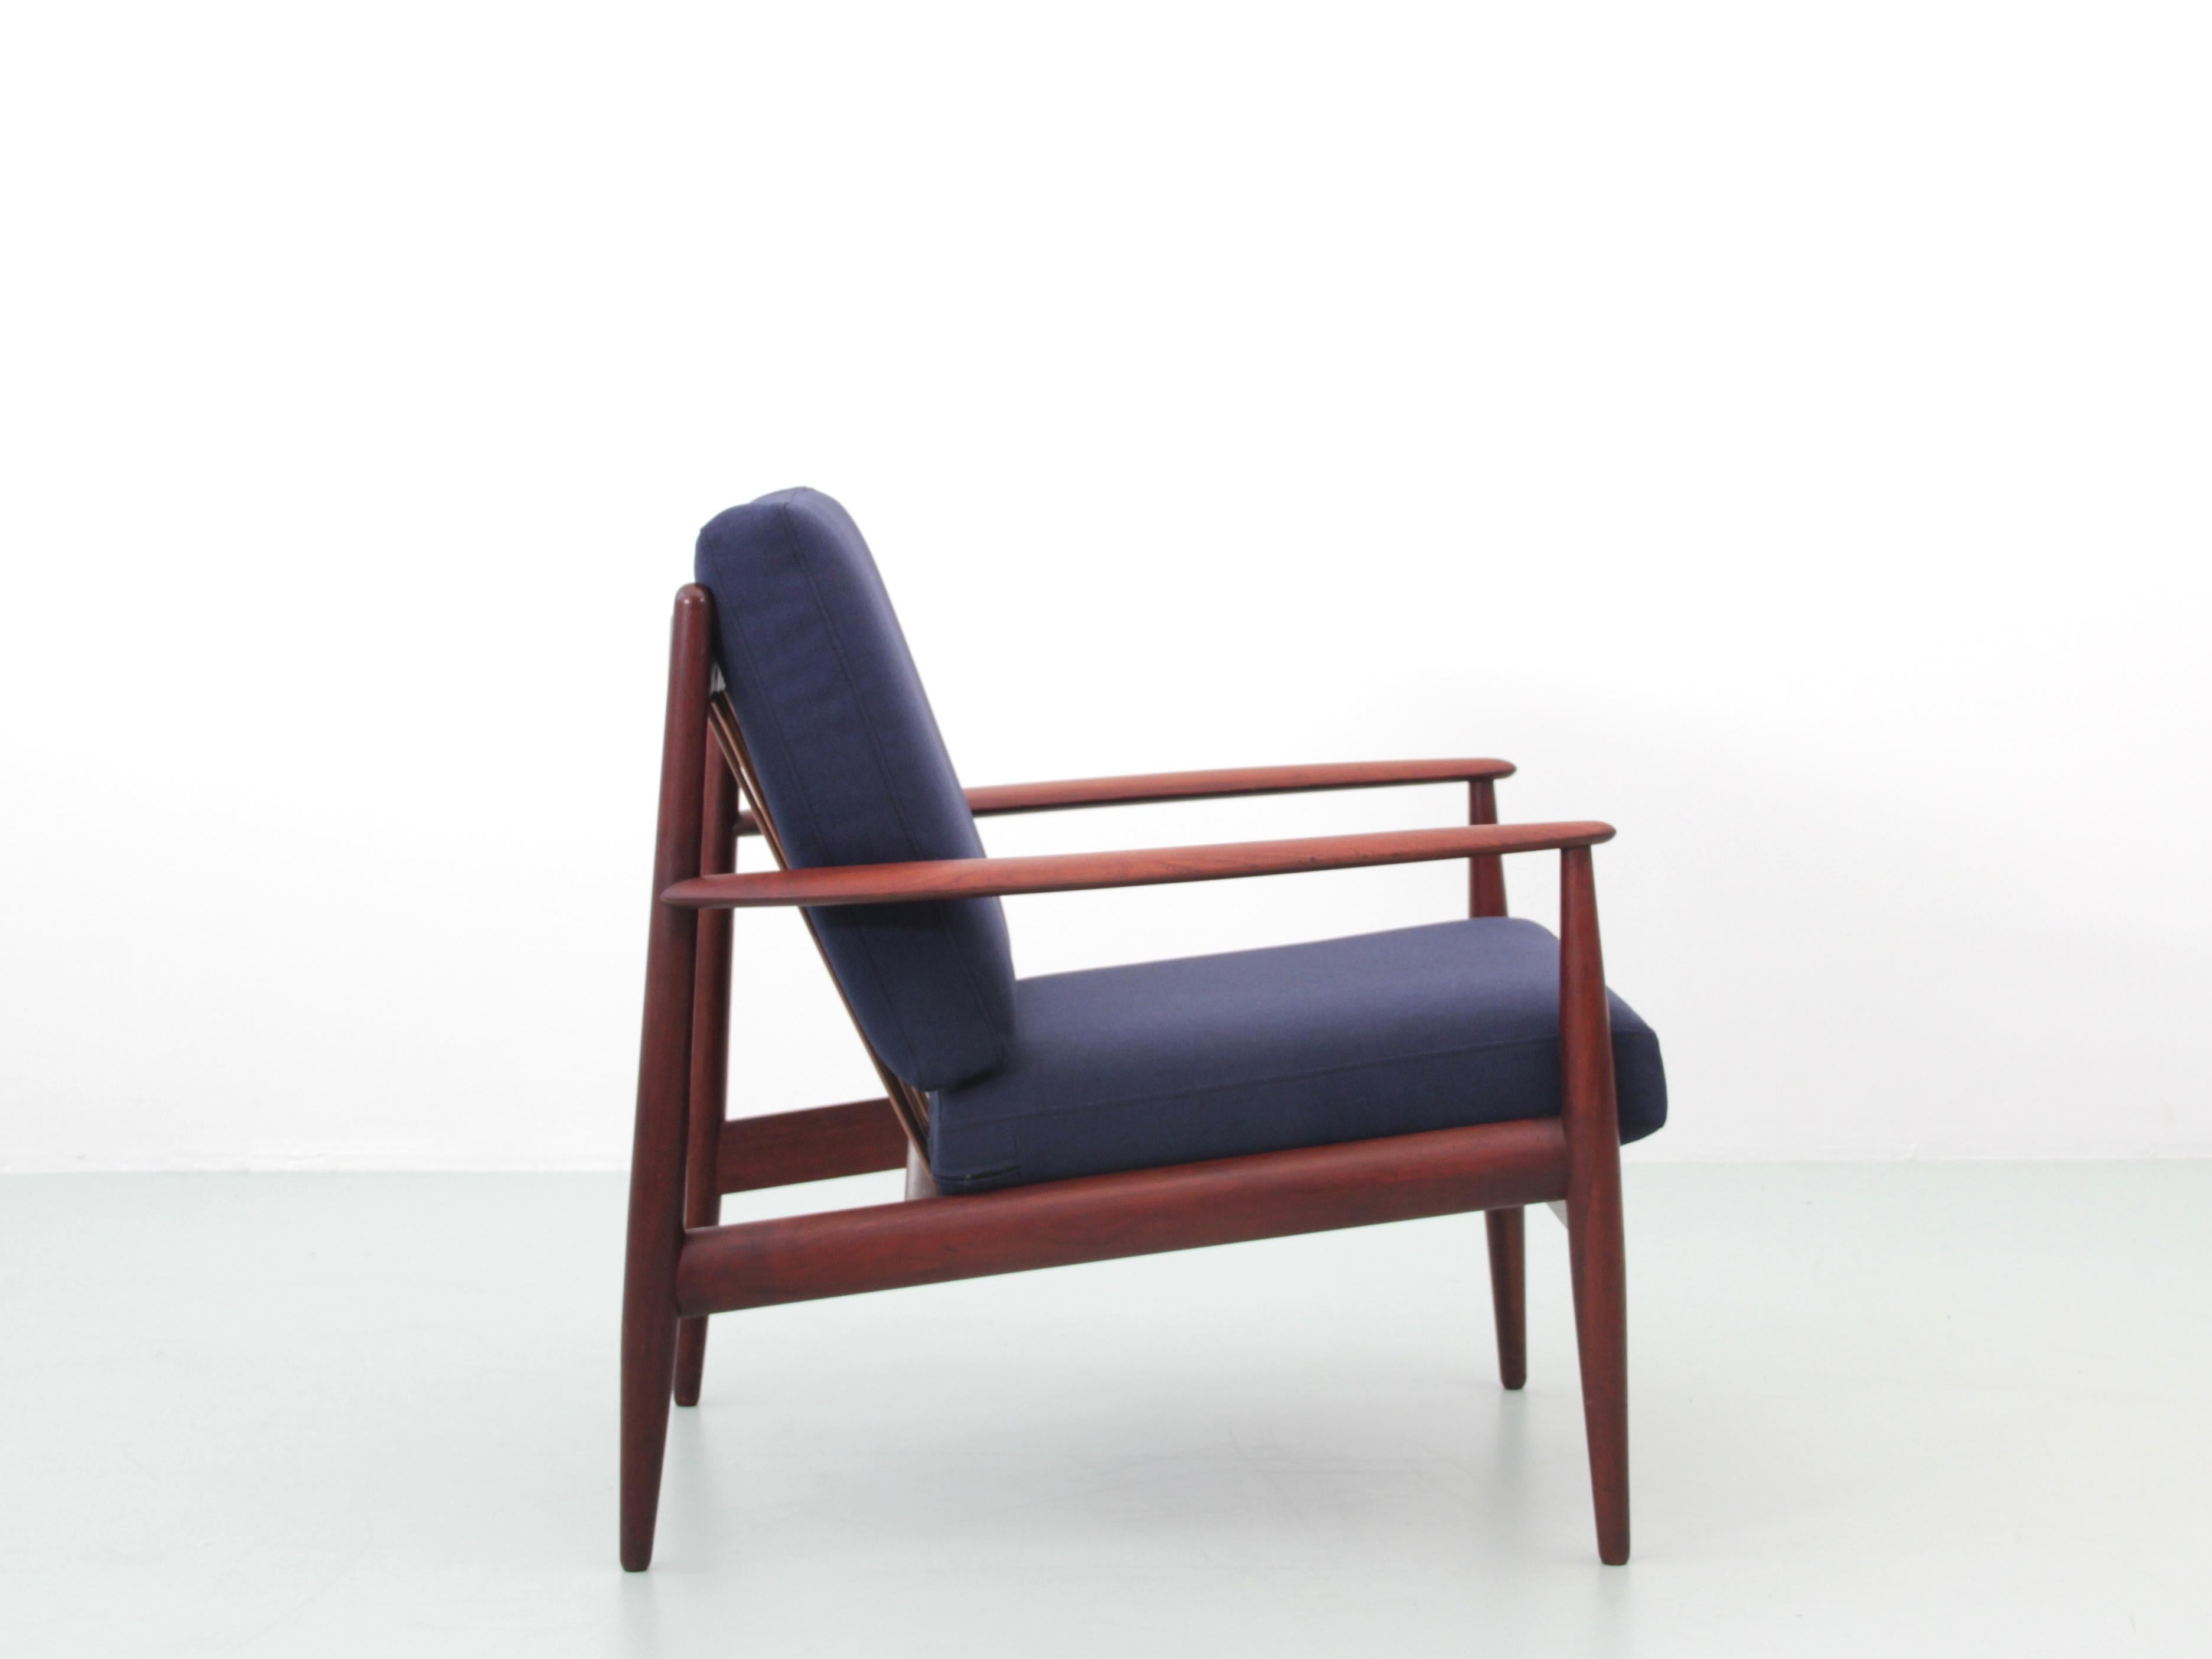 Scandinavian Mid-Century Modern Pair of Lounge Chairs in Teak Model 118 by Grete Jalk For Sale